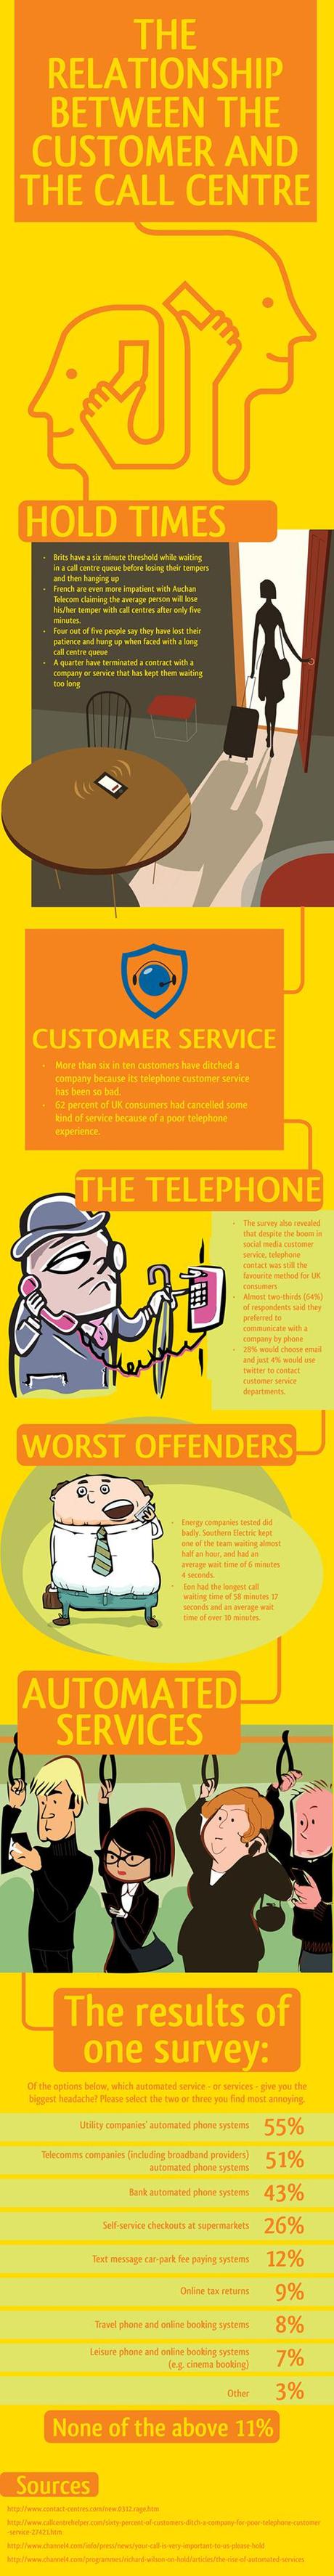 Infographic on the Relationship Between the Customer and the Call Center